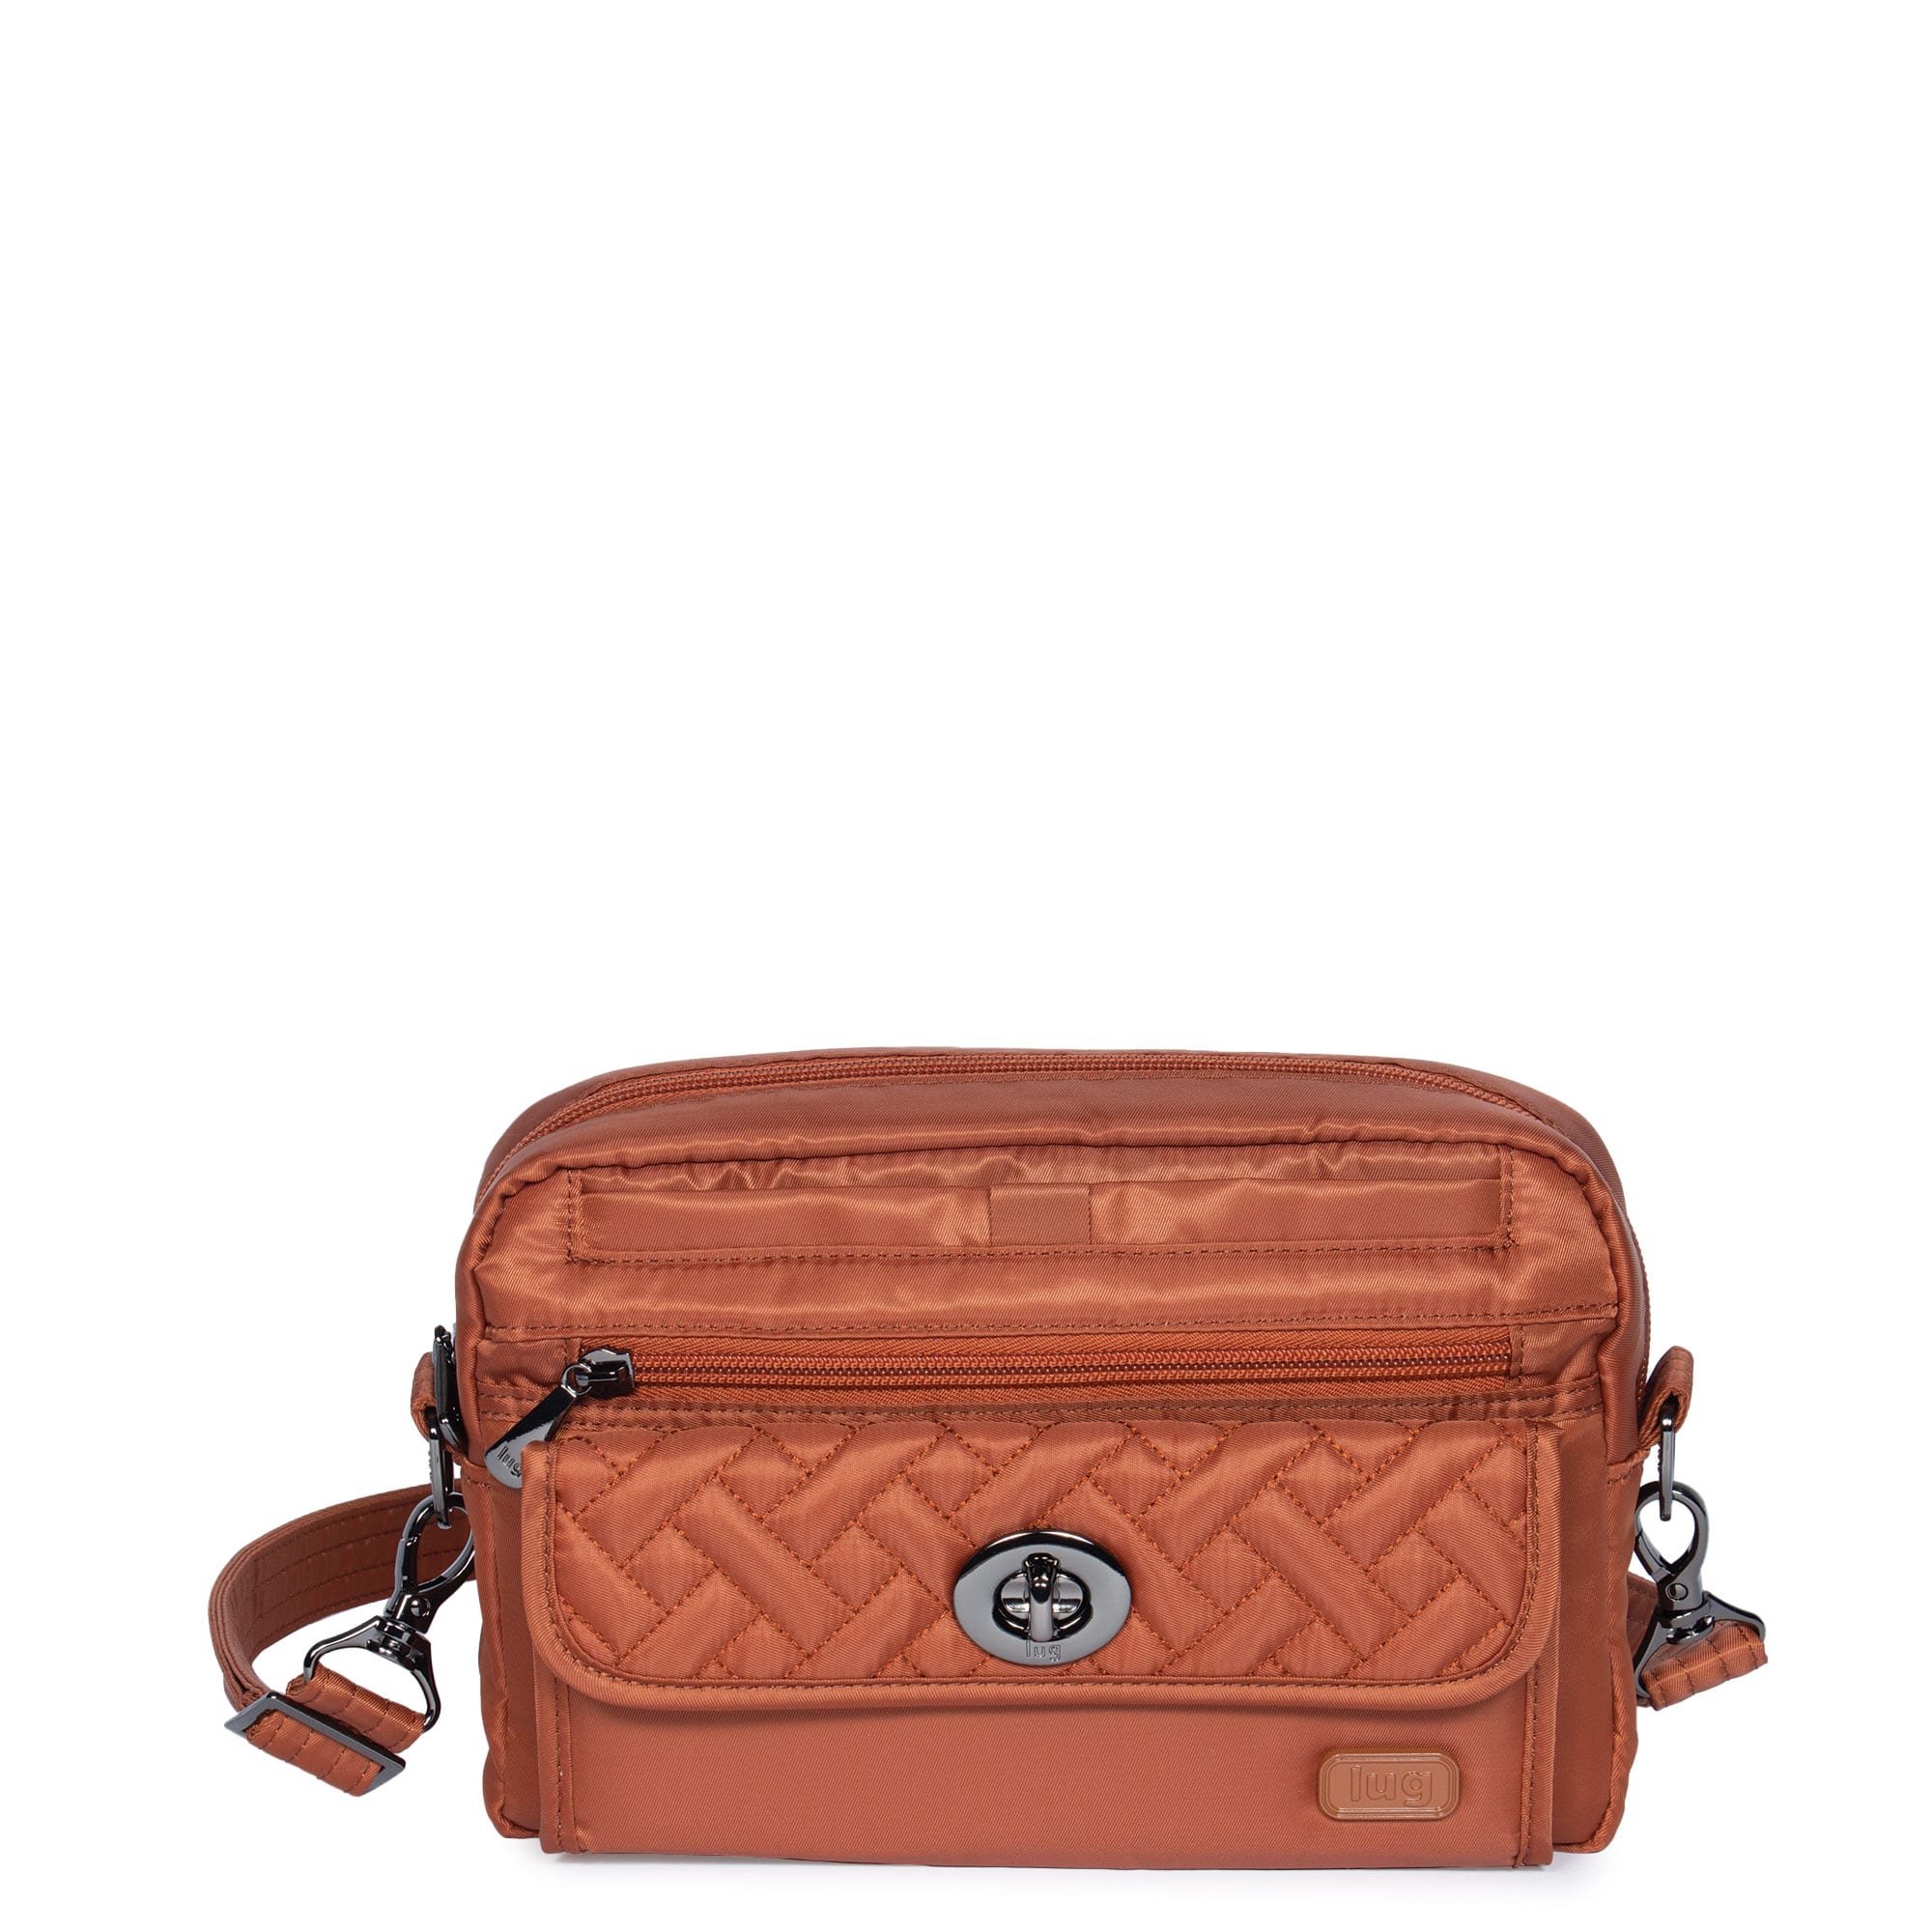 Glamfox - Checker Multi Pouch Crossbody Bag - 2 Colors Available - Brown